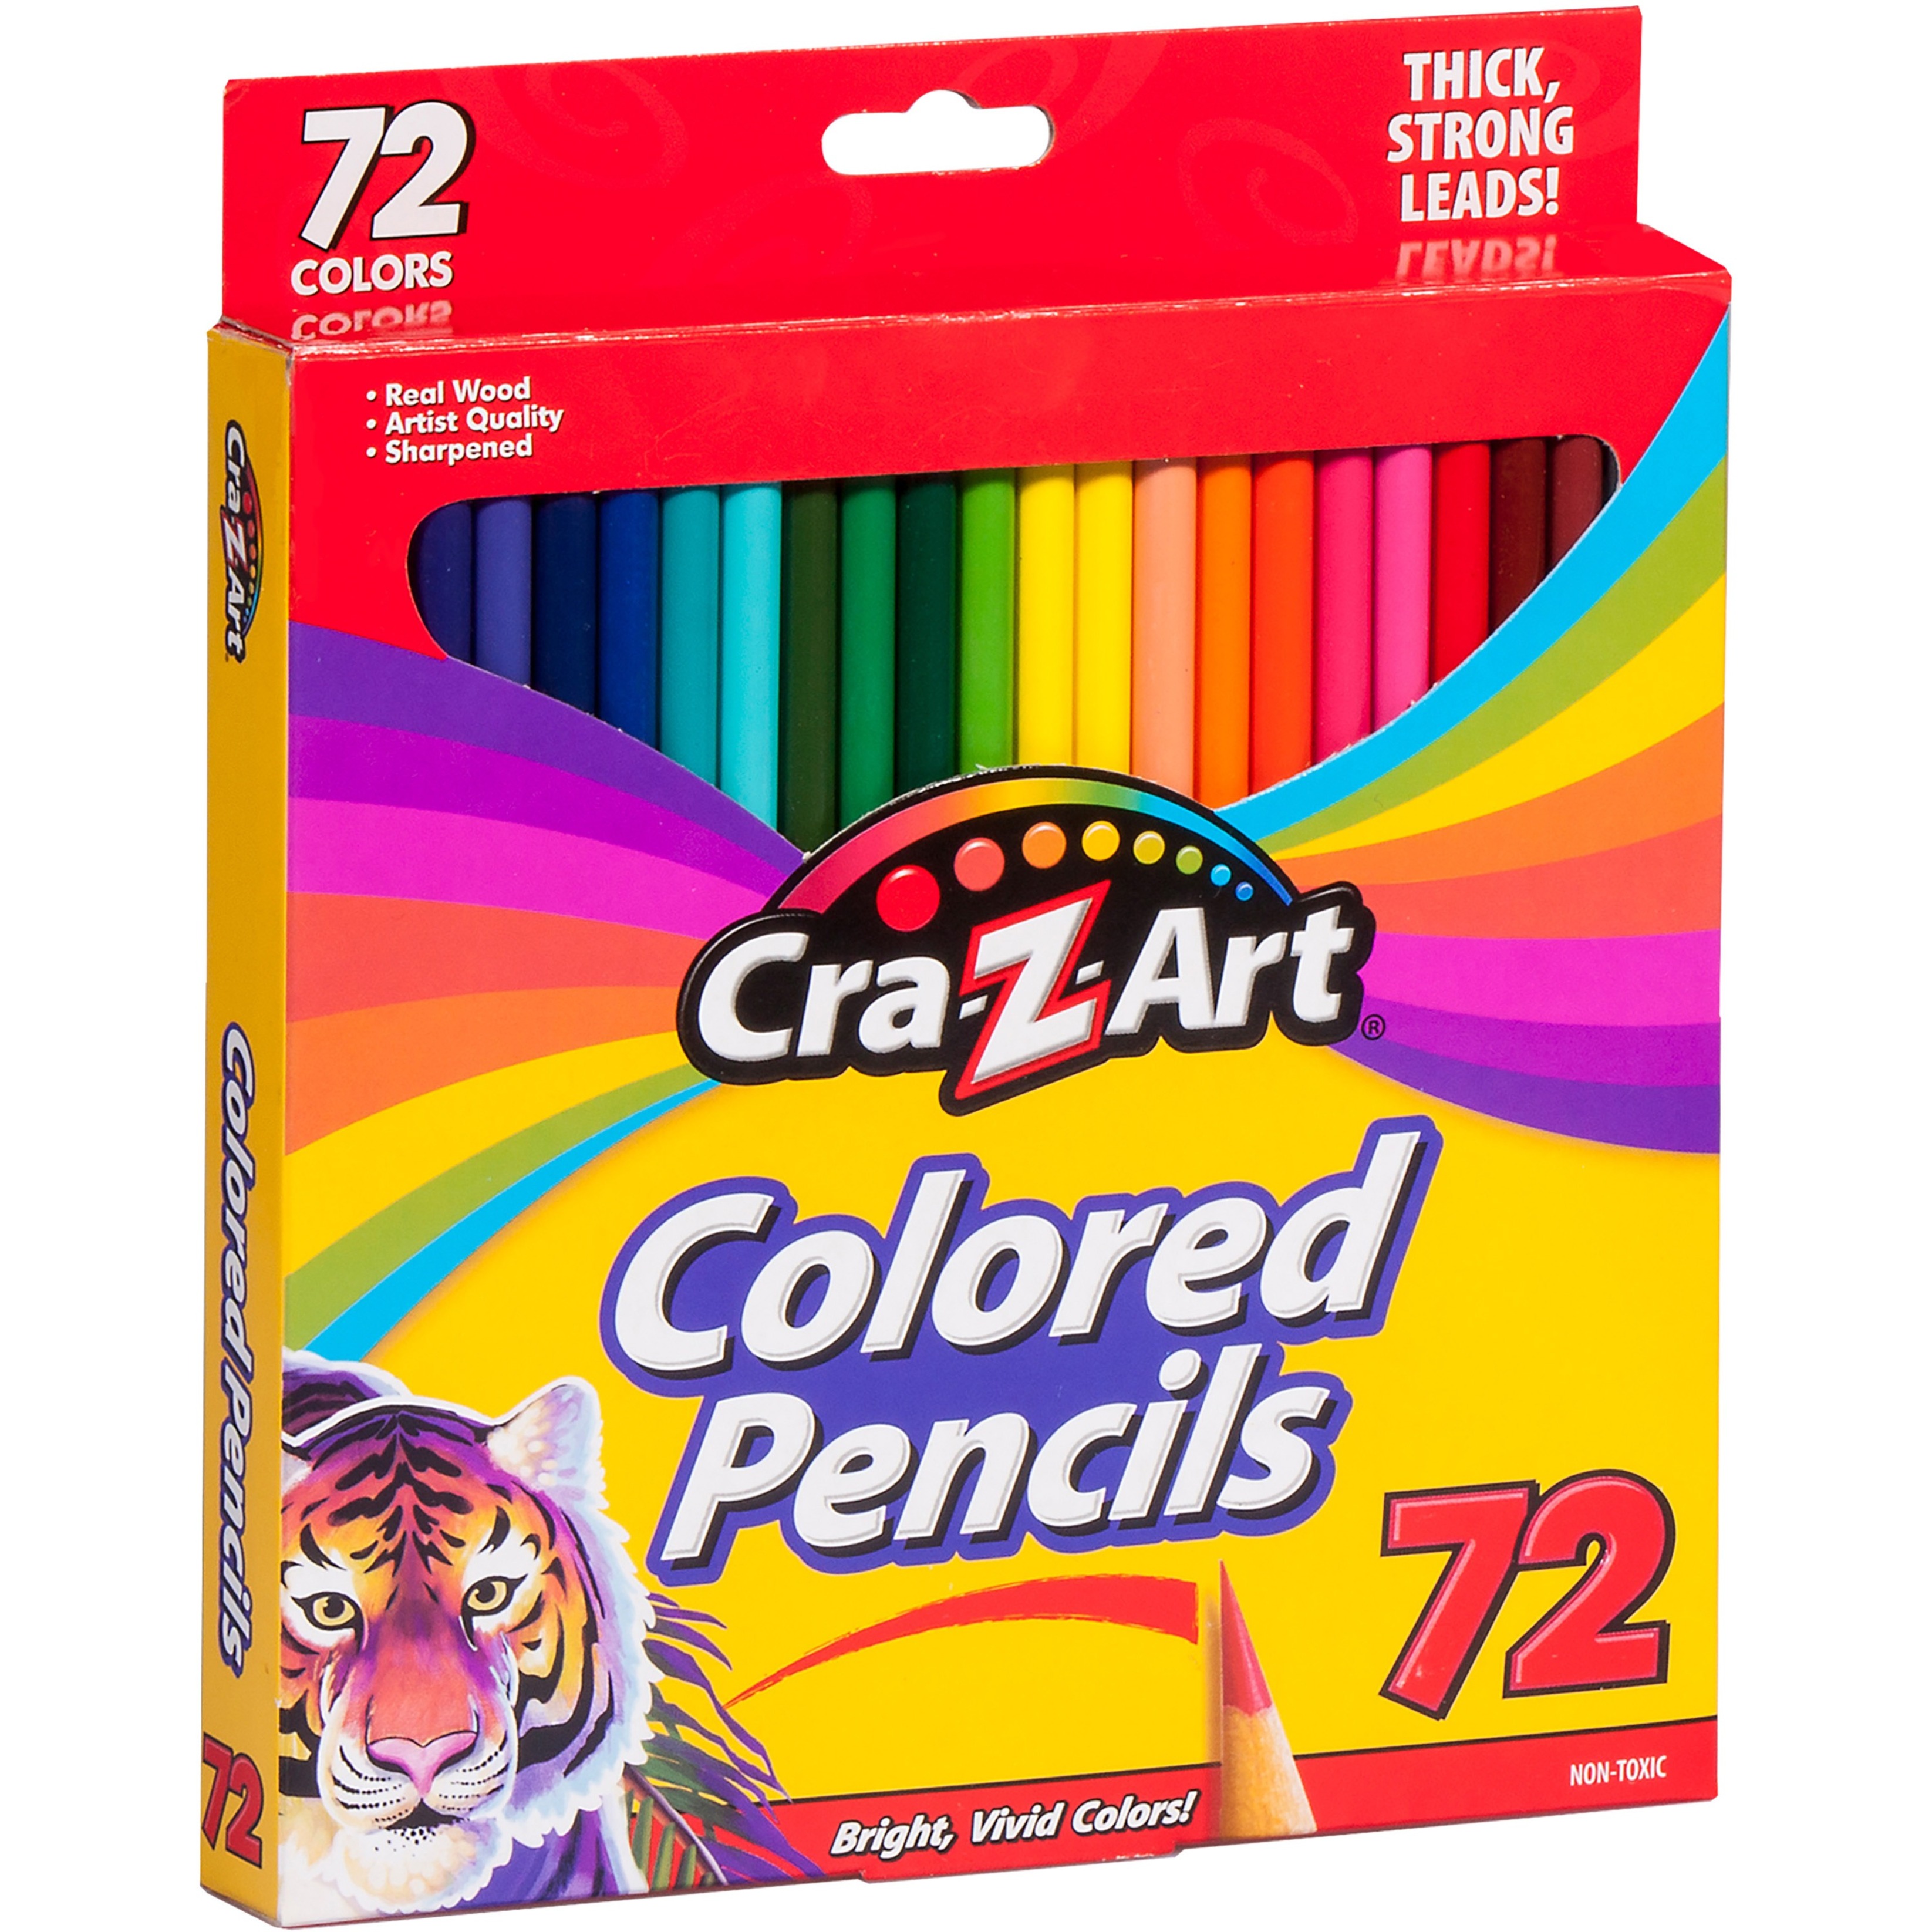 Cra-Z-Art Classic Colored Pencils, 72 Count, Multicolor, Beginner Child to Adult, Back to School - image 3 of 9